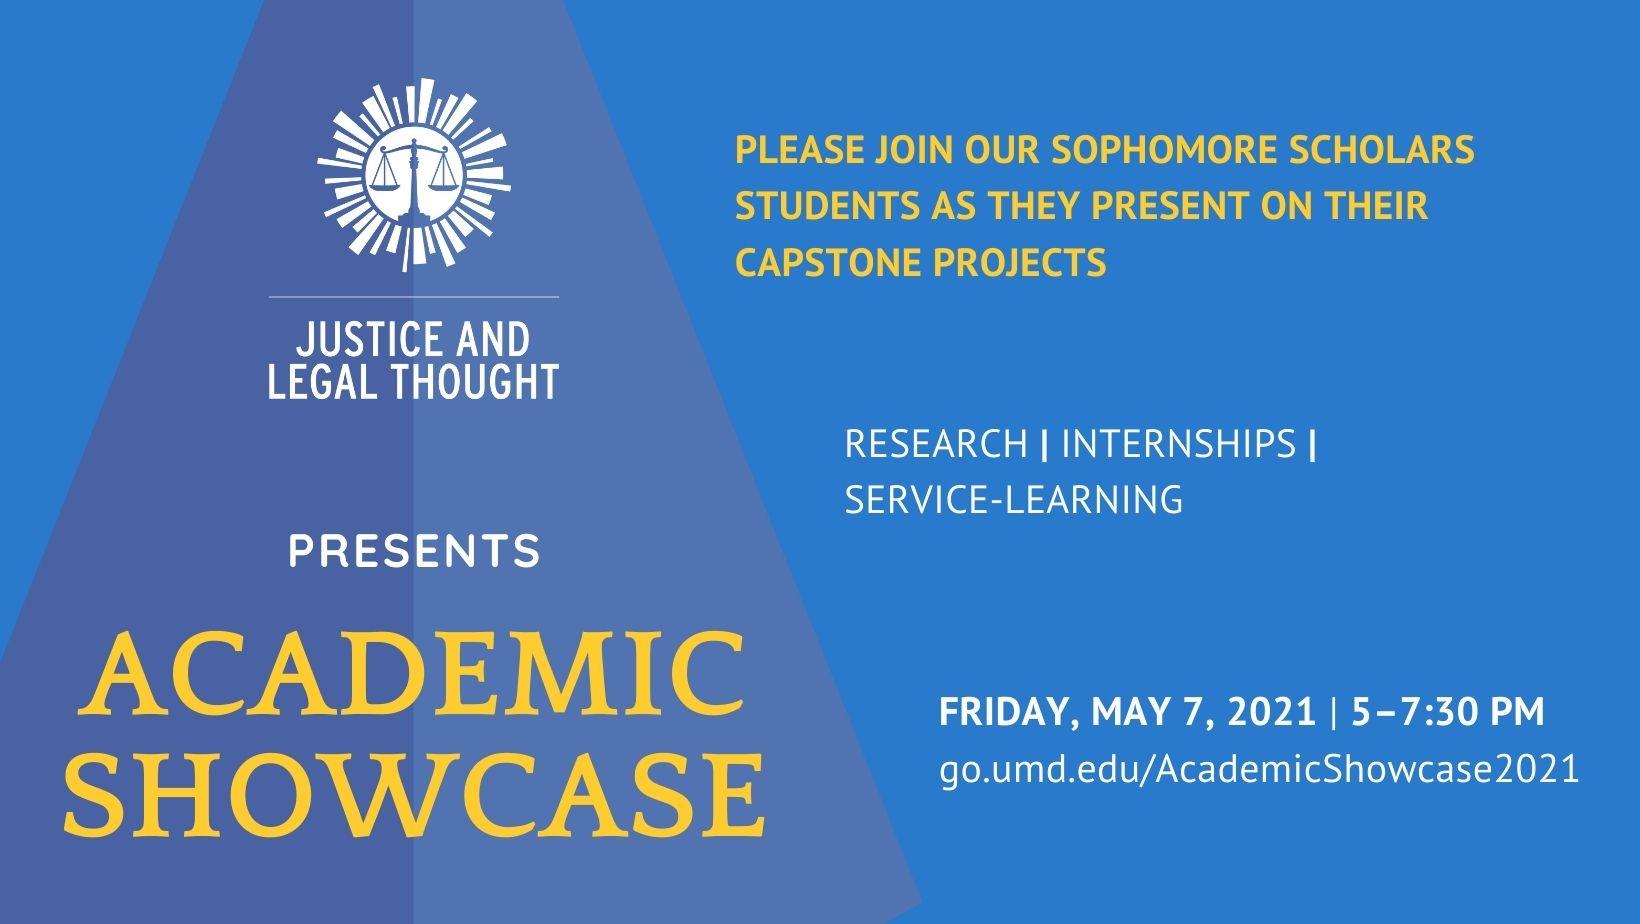 Join JLT's Academic Showcase on Friday, May 7, from 5 to 7:30 p.m.